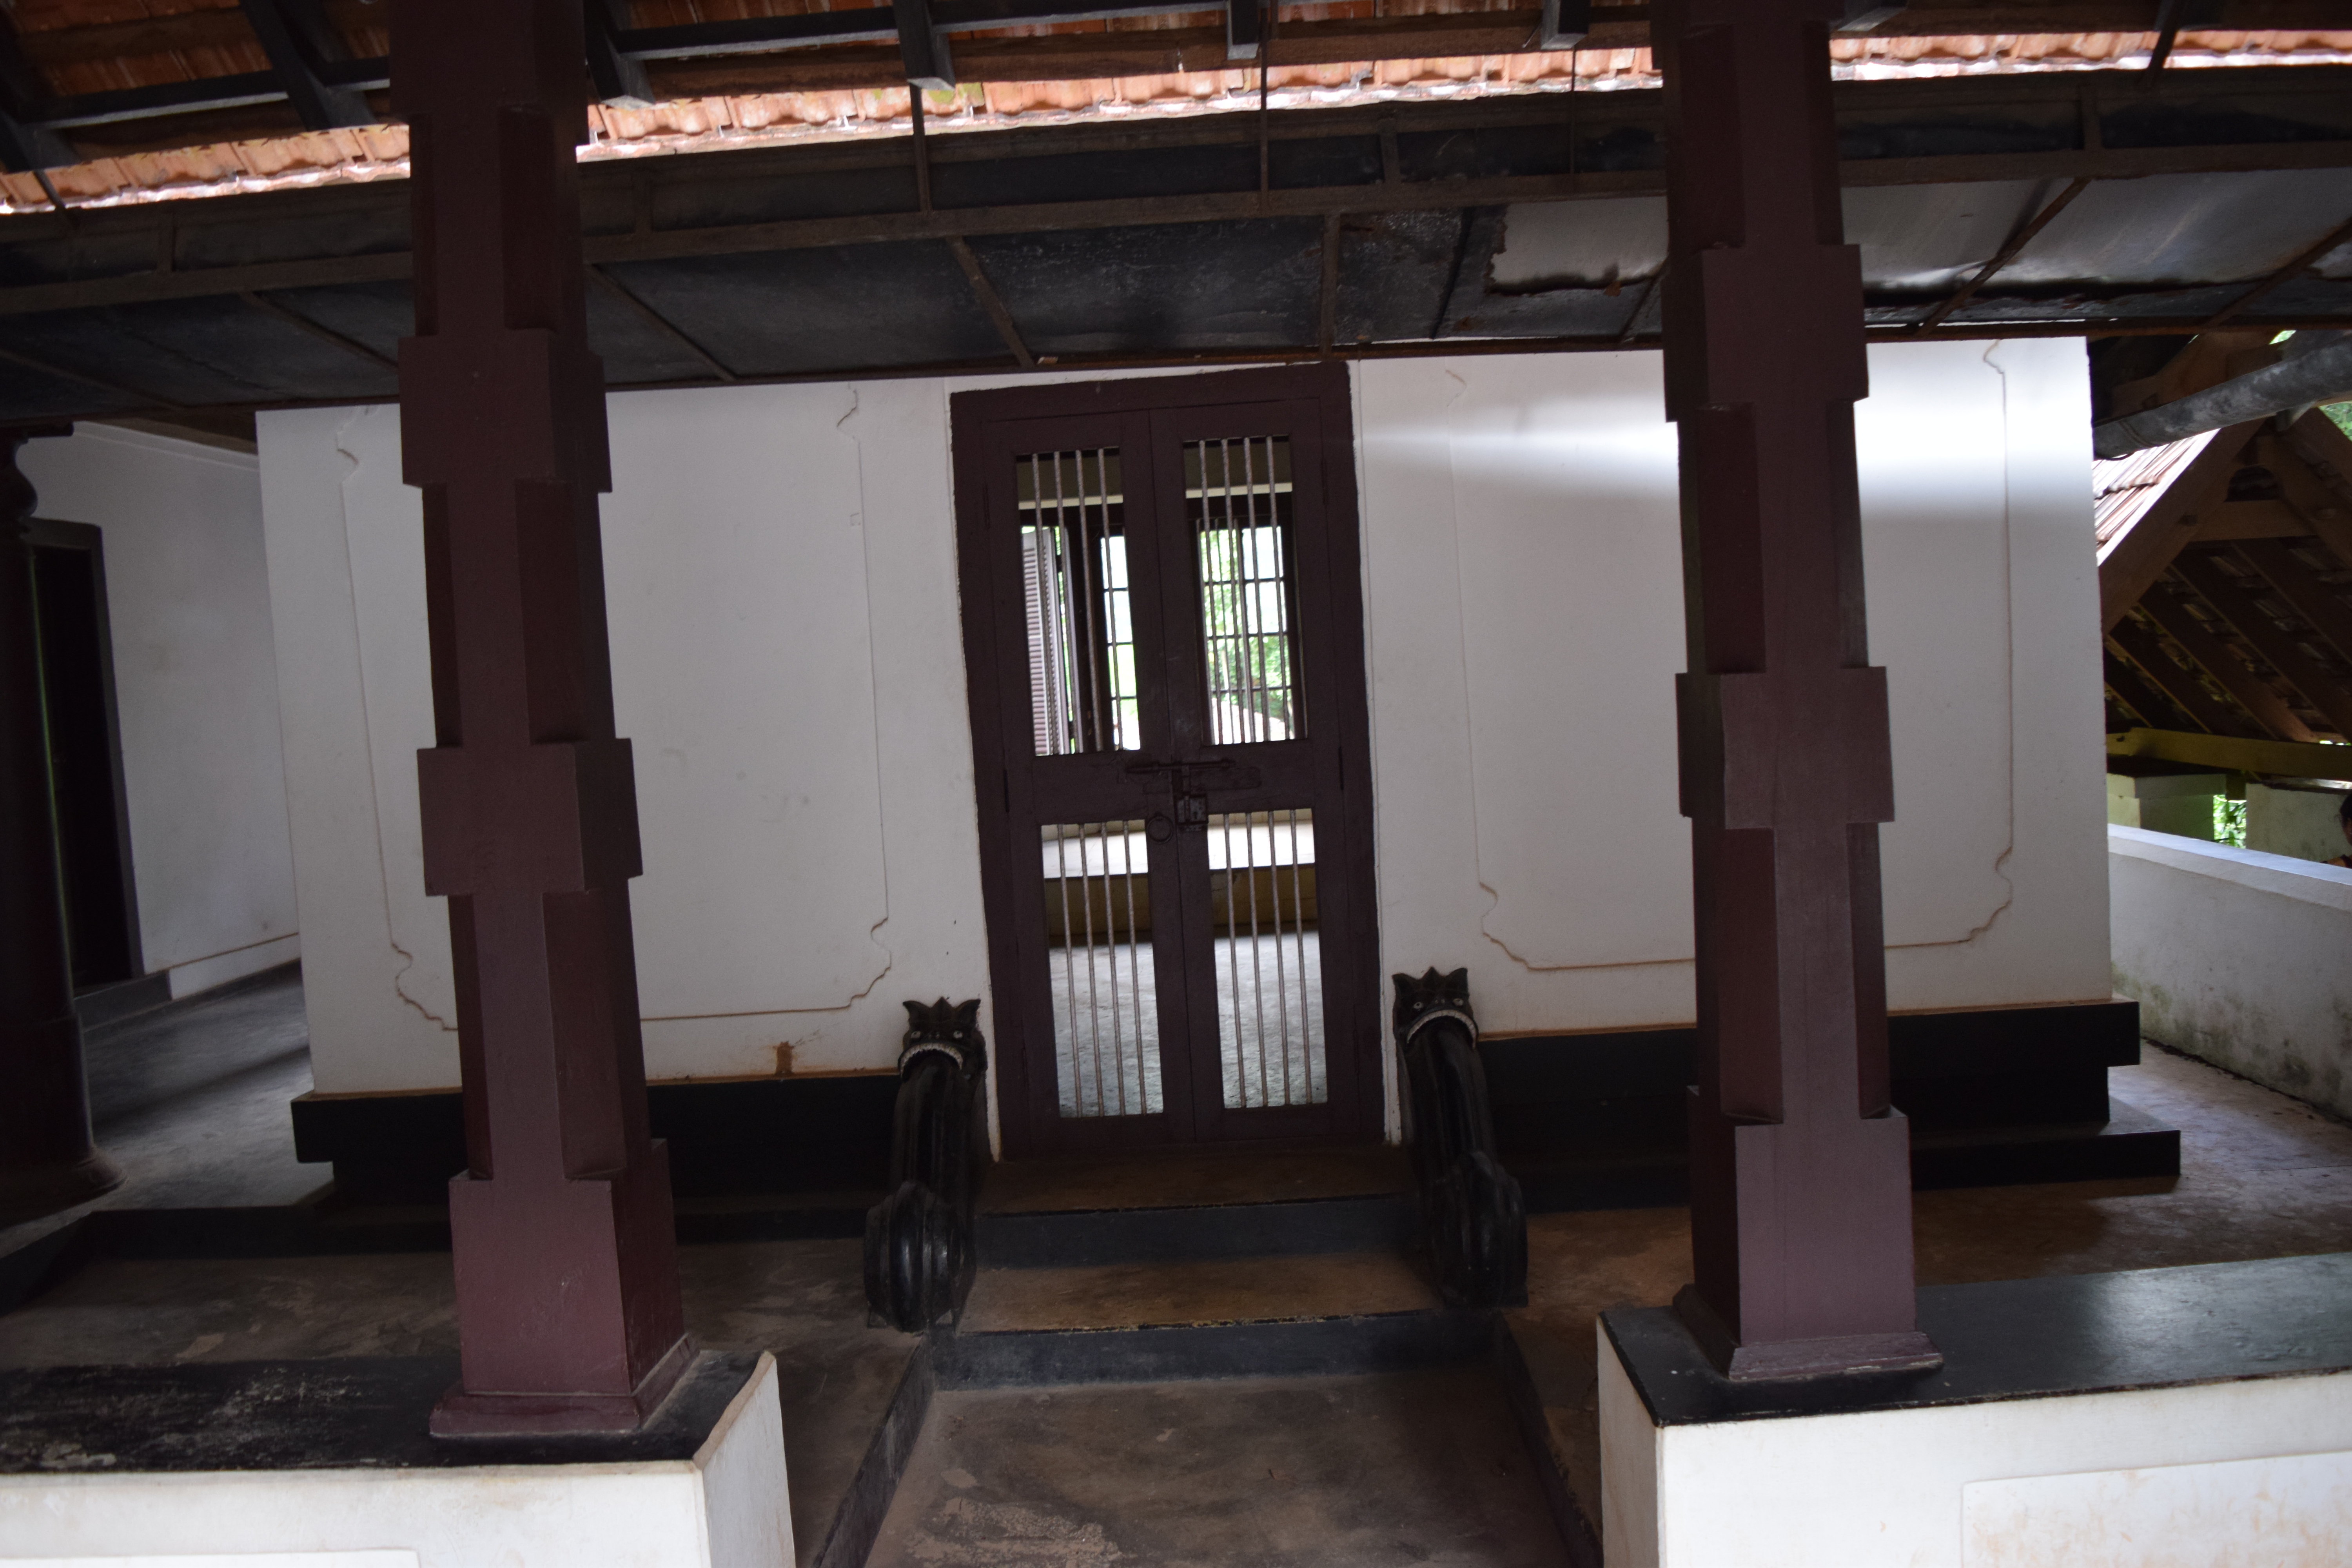  one of the most important Hill Palace Museum of Ernakulam